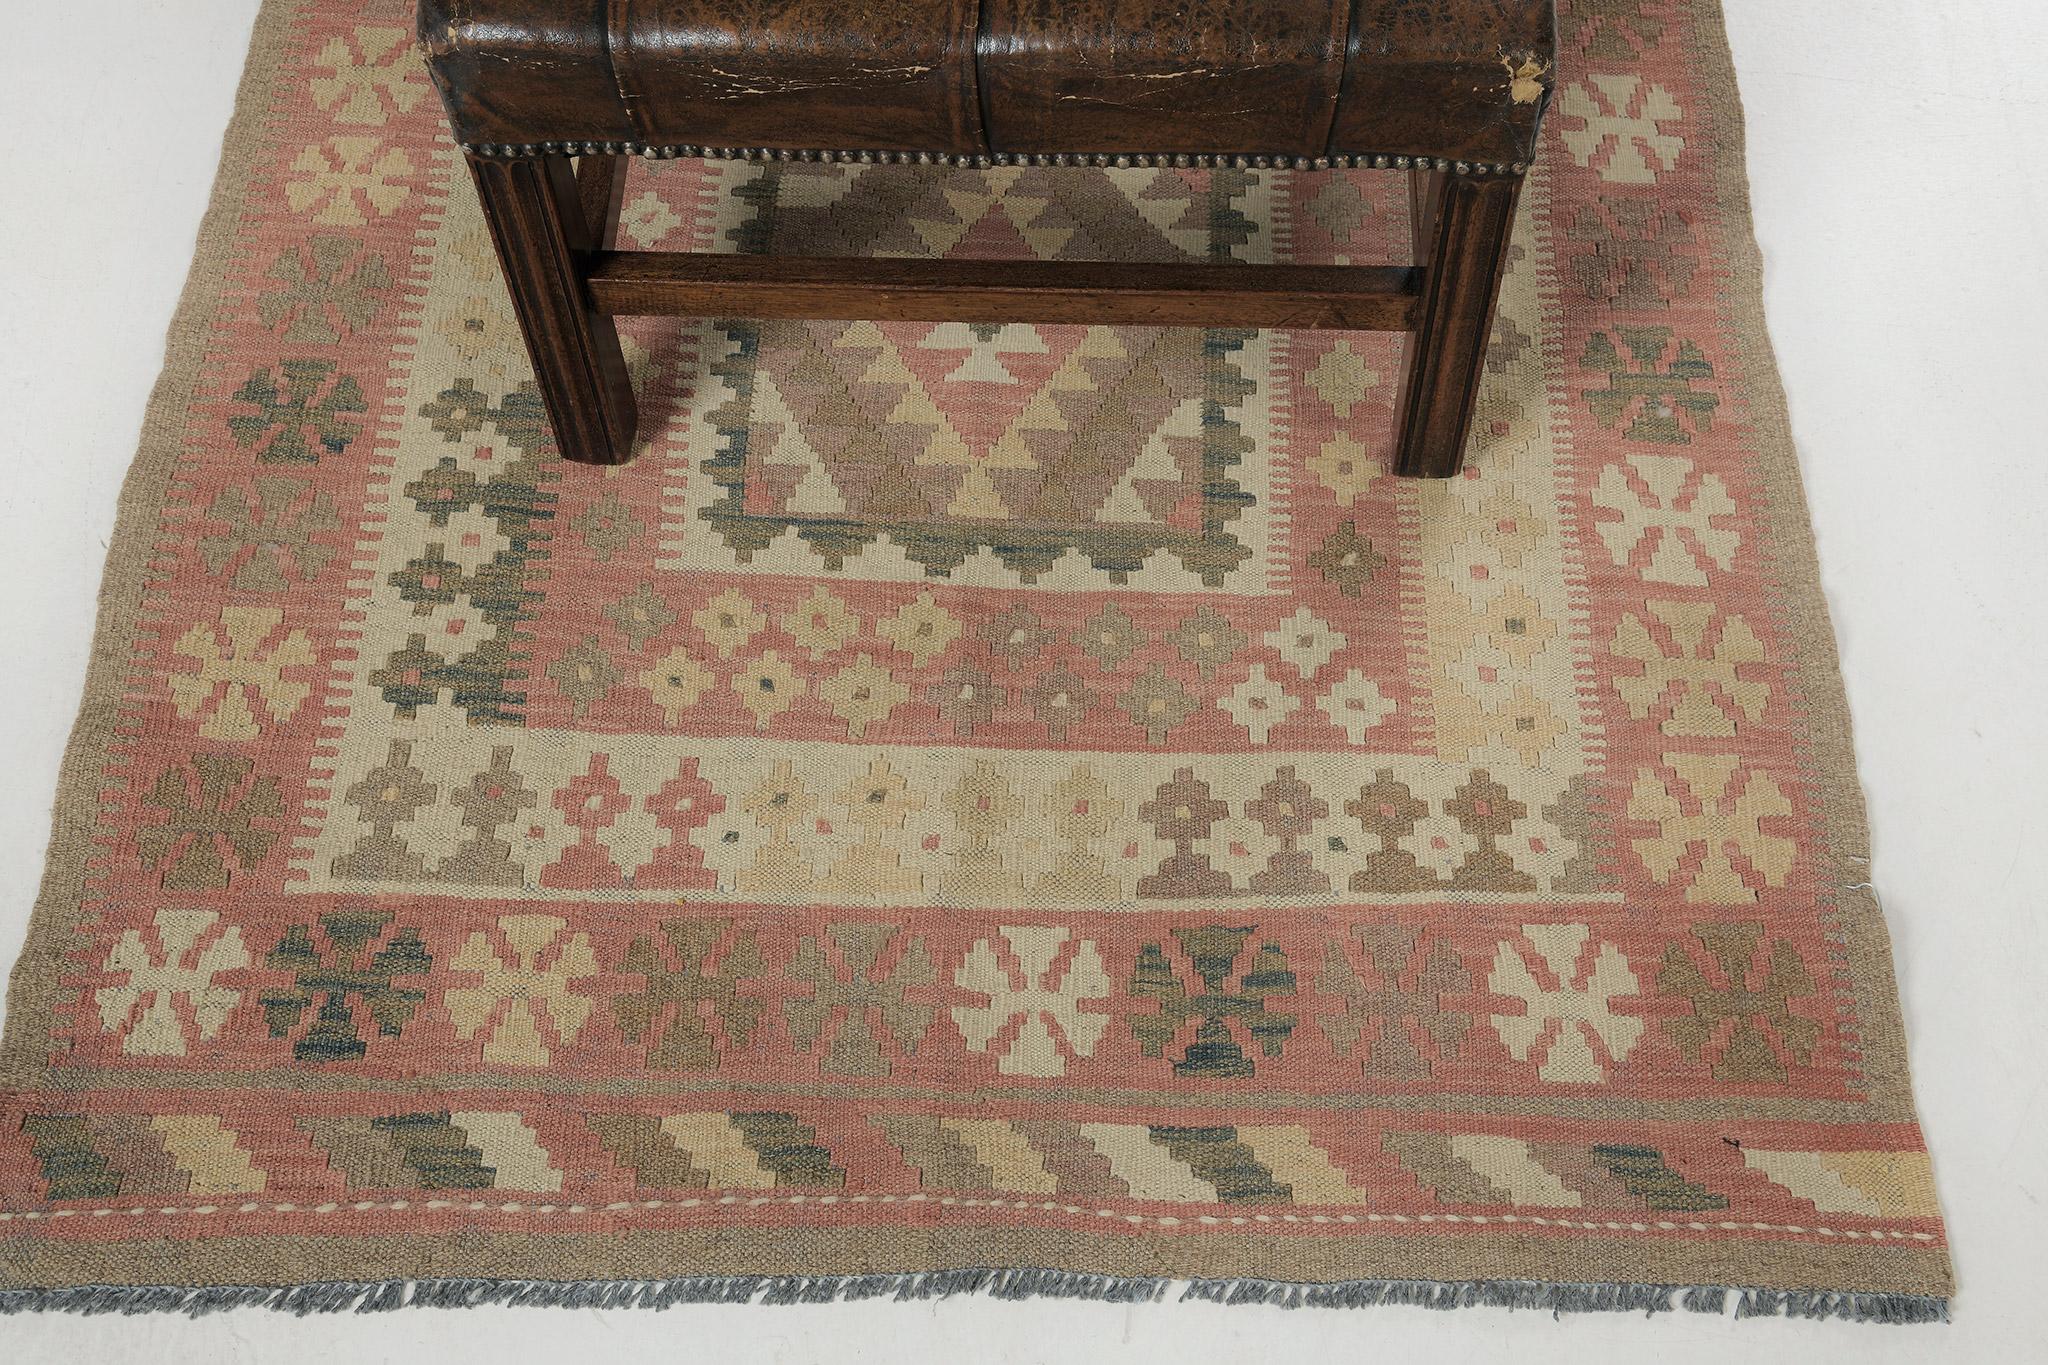 More plausible to an impressive theme, this magnificent flatweave Kilim encompasses a sophisticated pattern. This masterpiece is perfectly aligned with each other in that these motifs and symbols are perfectly matched in a neutral scheme. A home